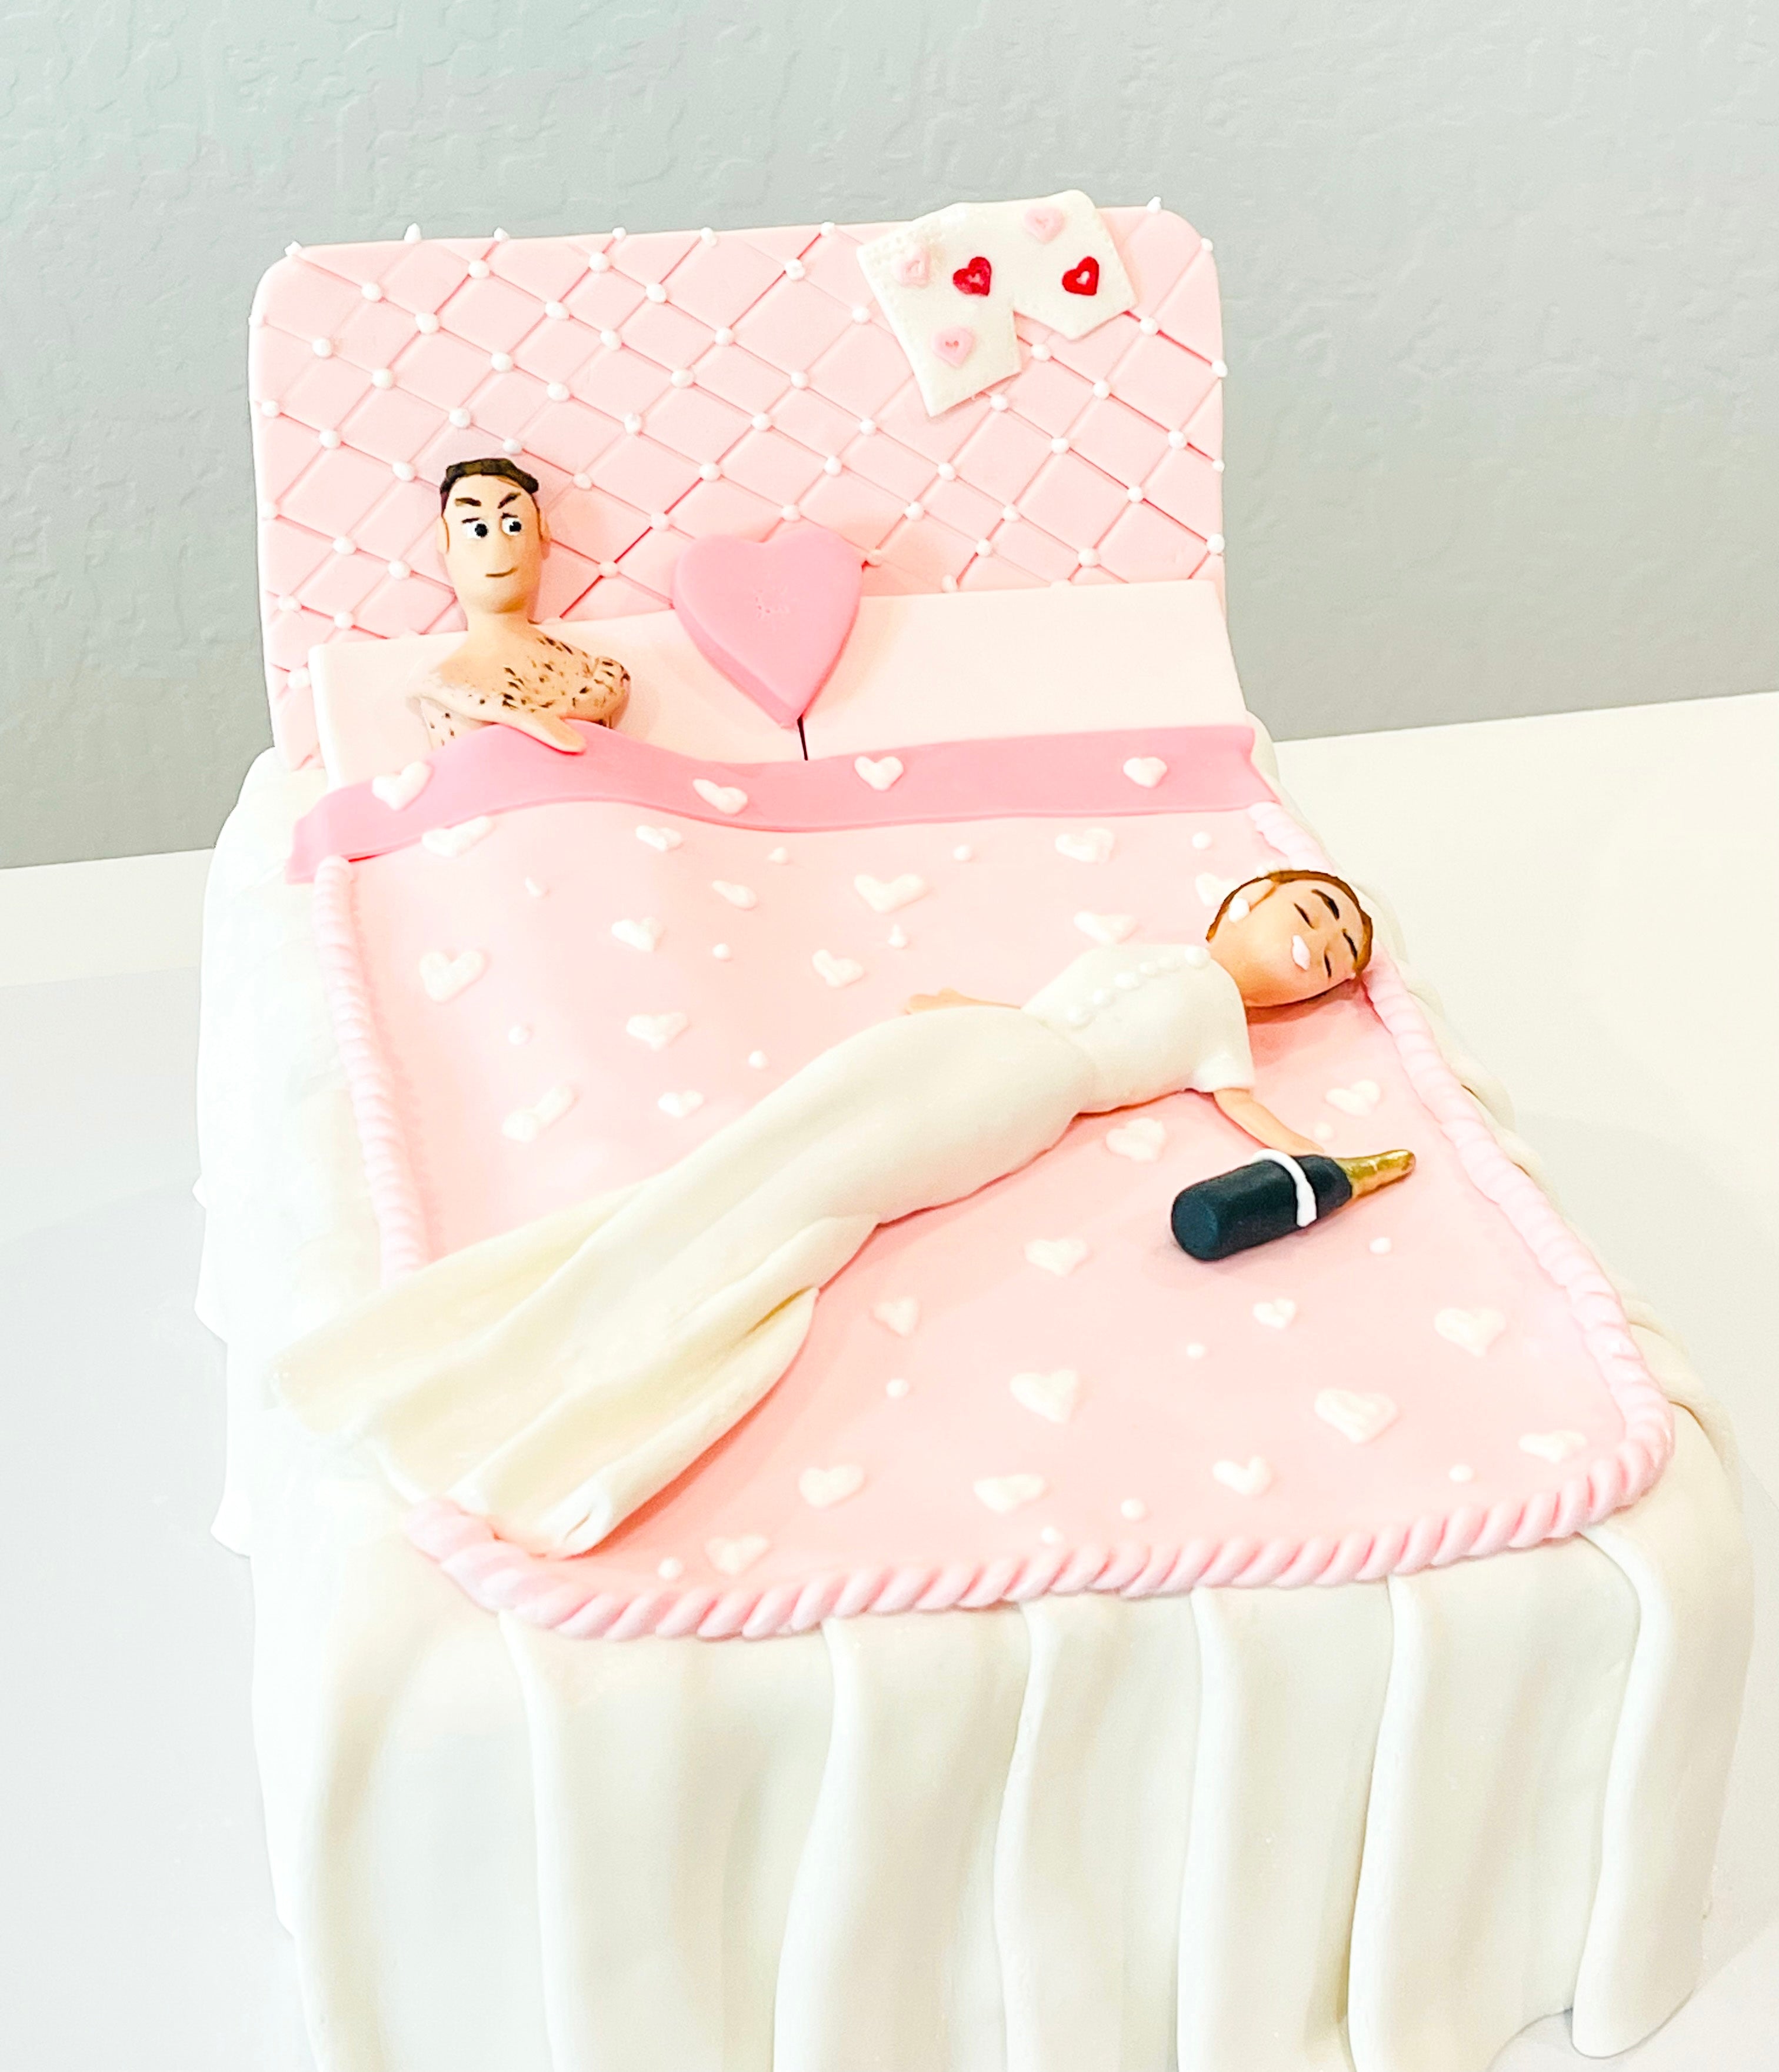 Nutty creations - Anniversary cakes#Funny bed cake#couple... | Facebook